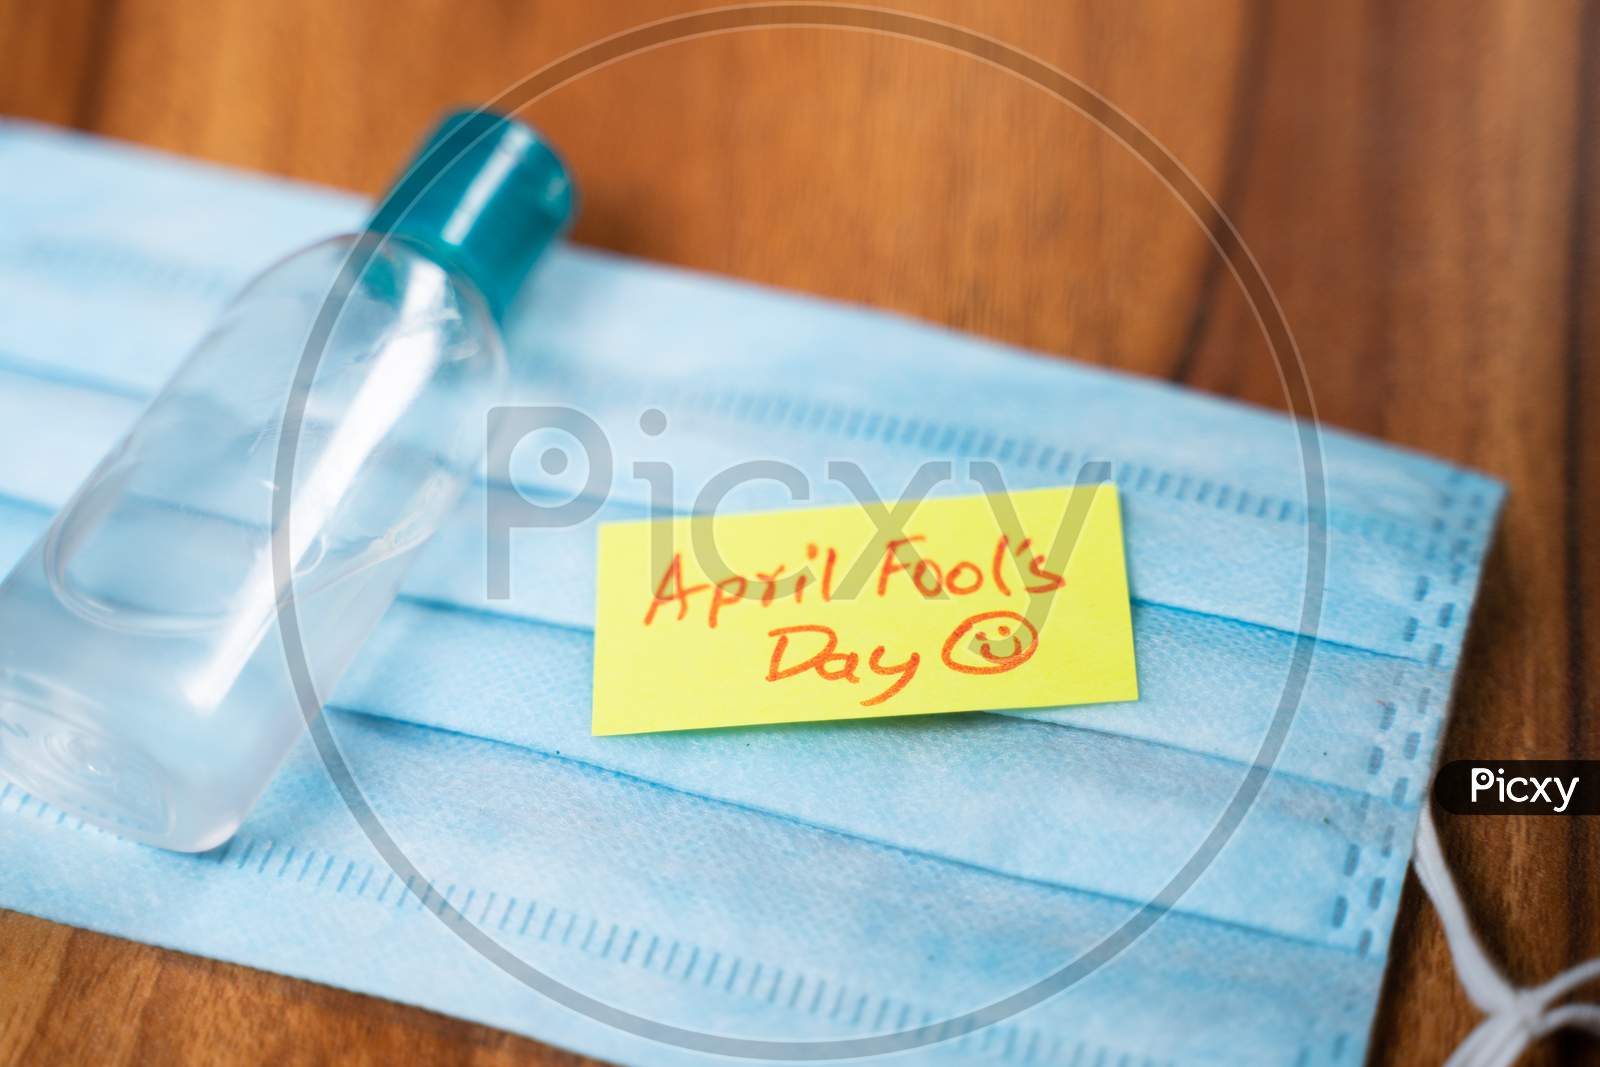 April Fools Day Sticky Note On Medical Face Mask With Hand Sanitizer Boottle On Table - Concept Of April Fools Day Celebrations During Coroanvirus Covid-19 Pandemic.